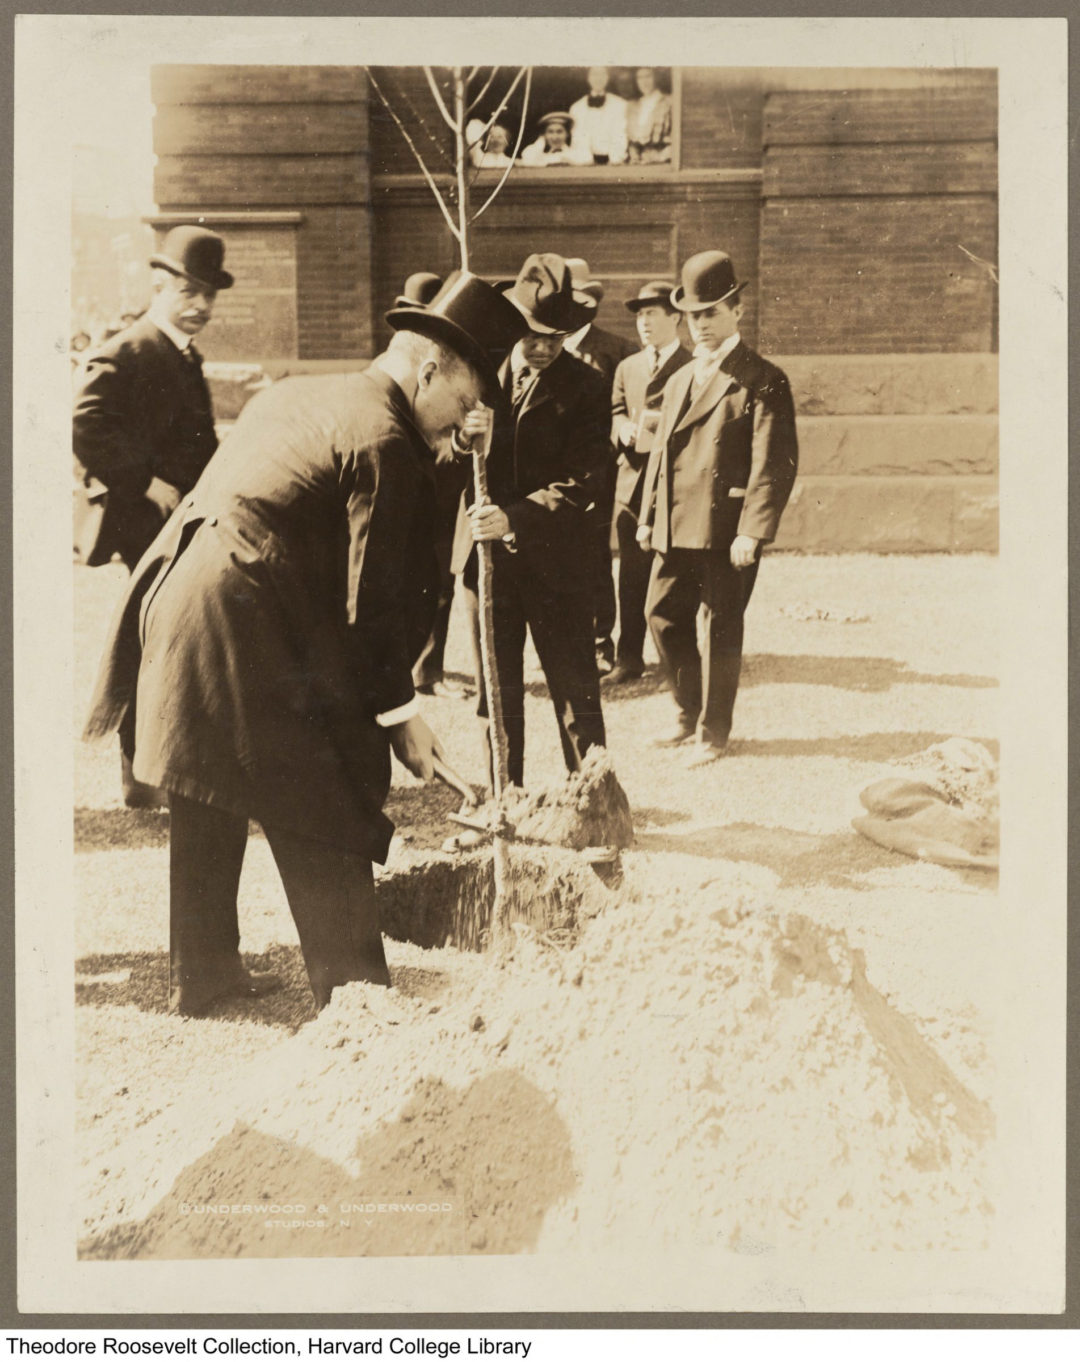 President Theodore Roosevelt planting a tree in Fort Worth, Texas, in 1905.